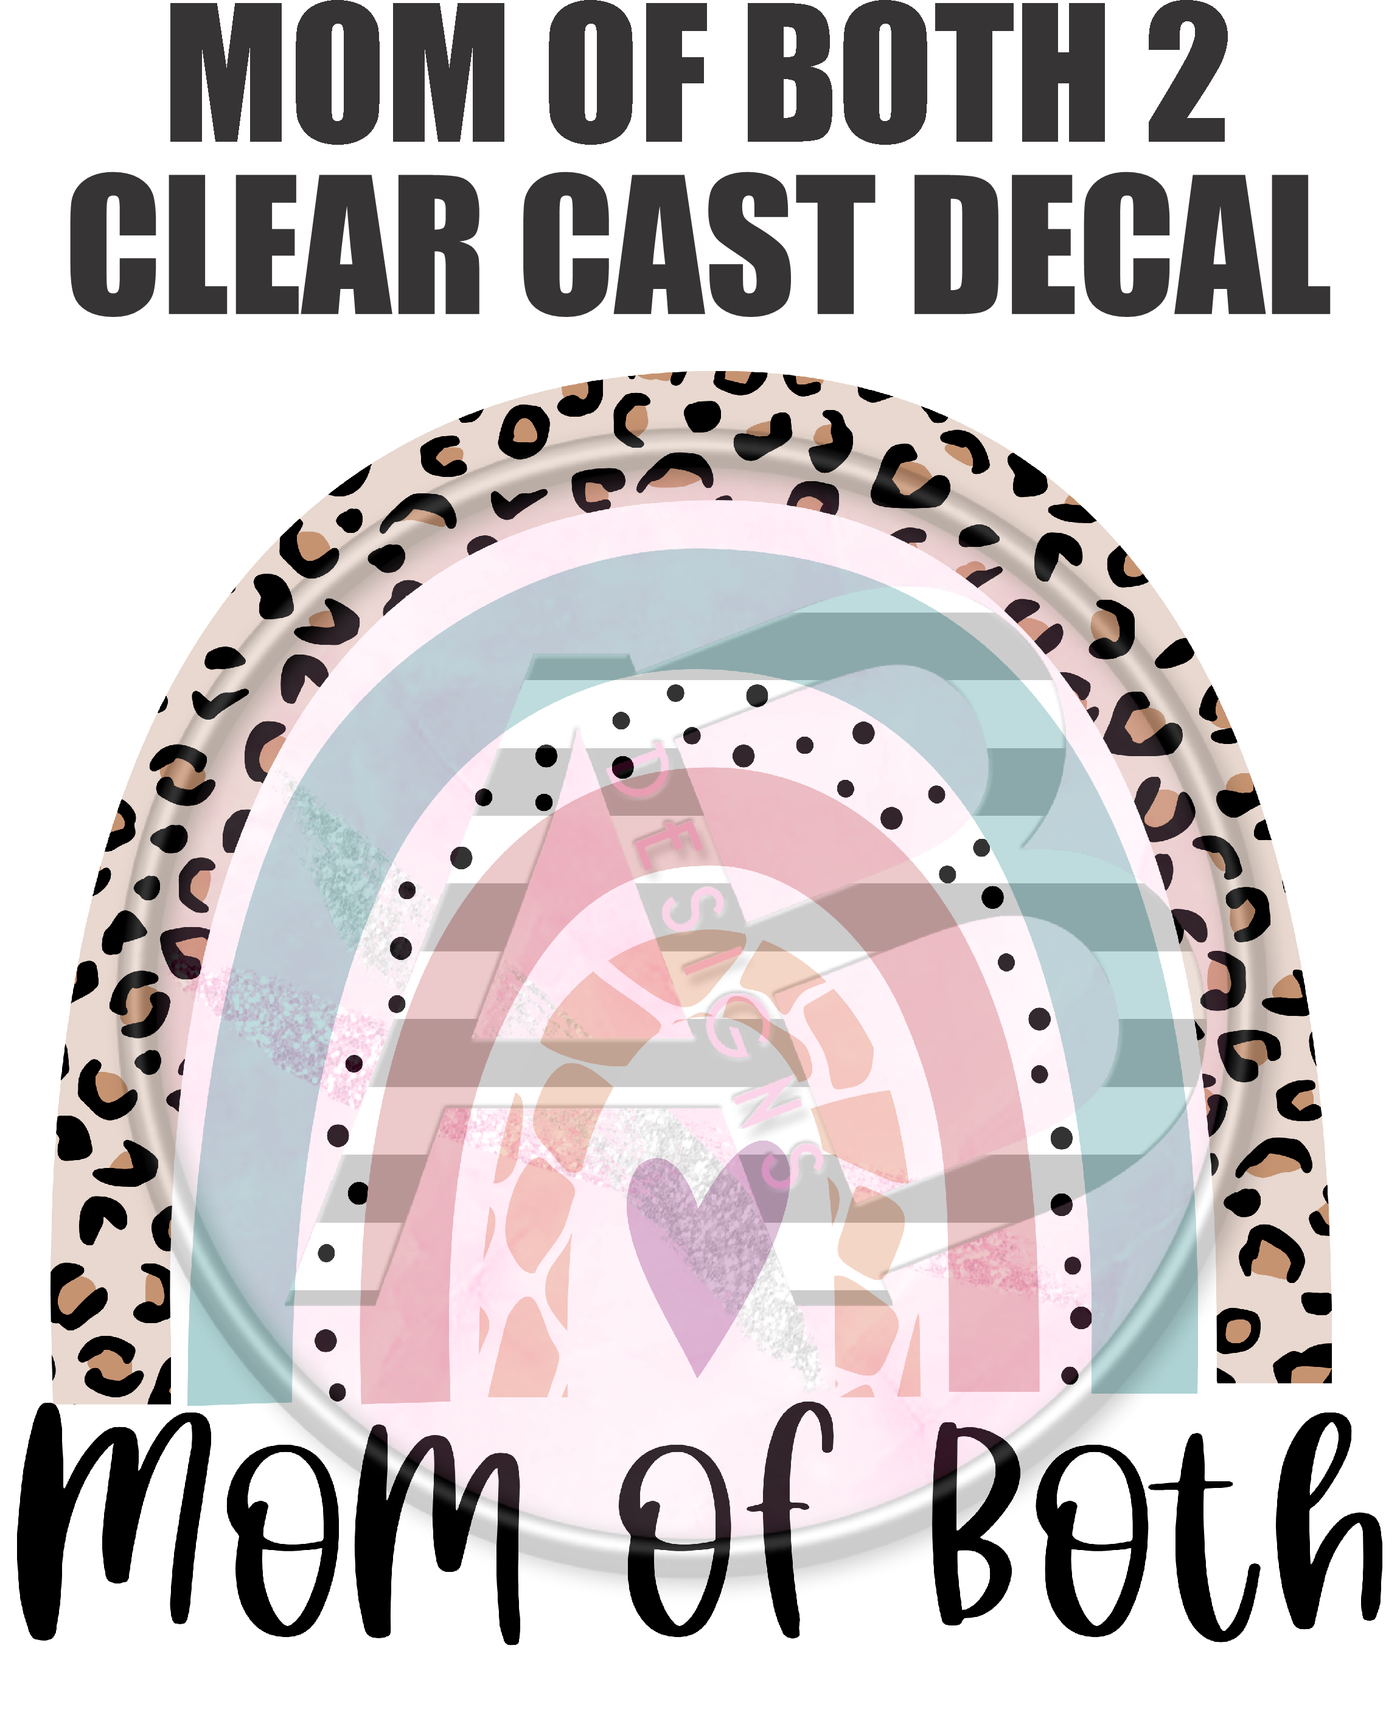 Mom of Both 2 - Clear Cast Decal